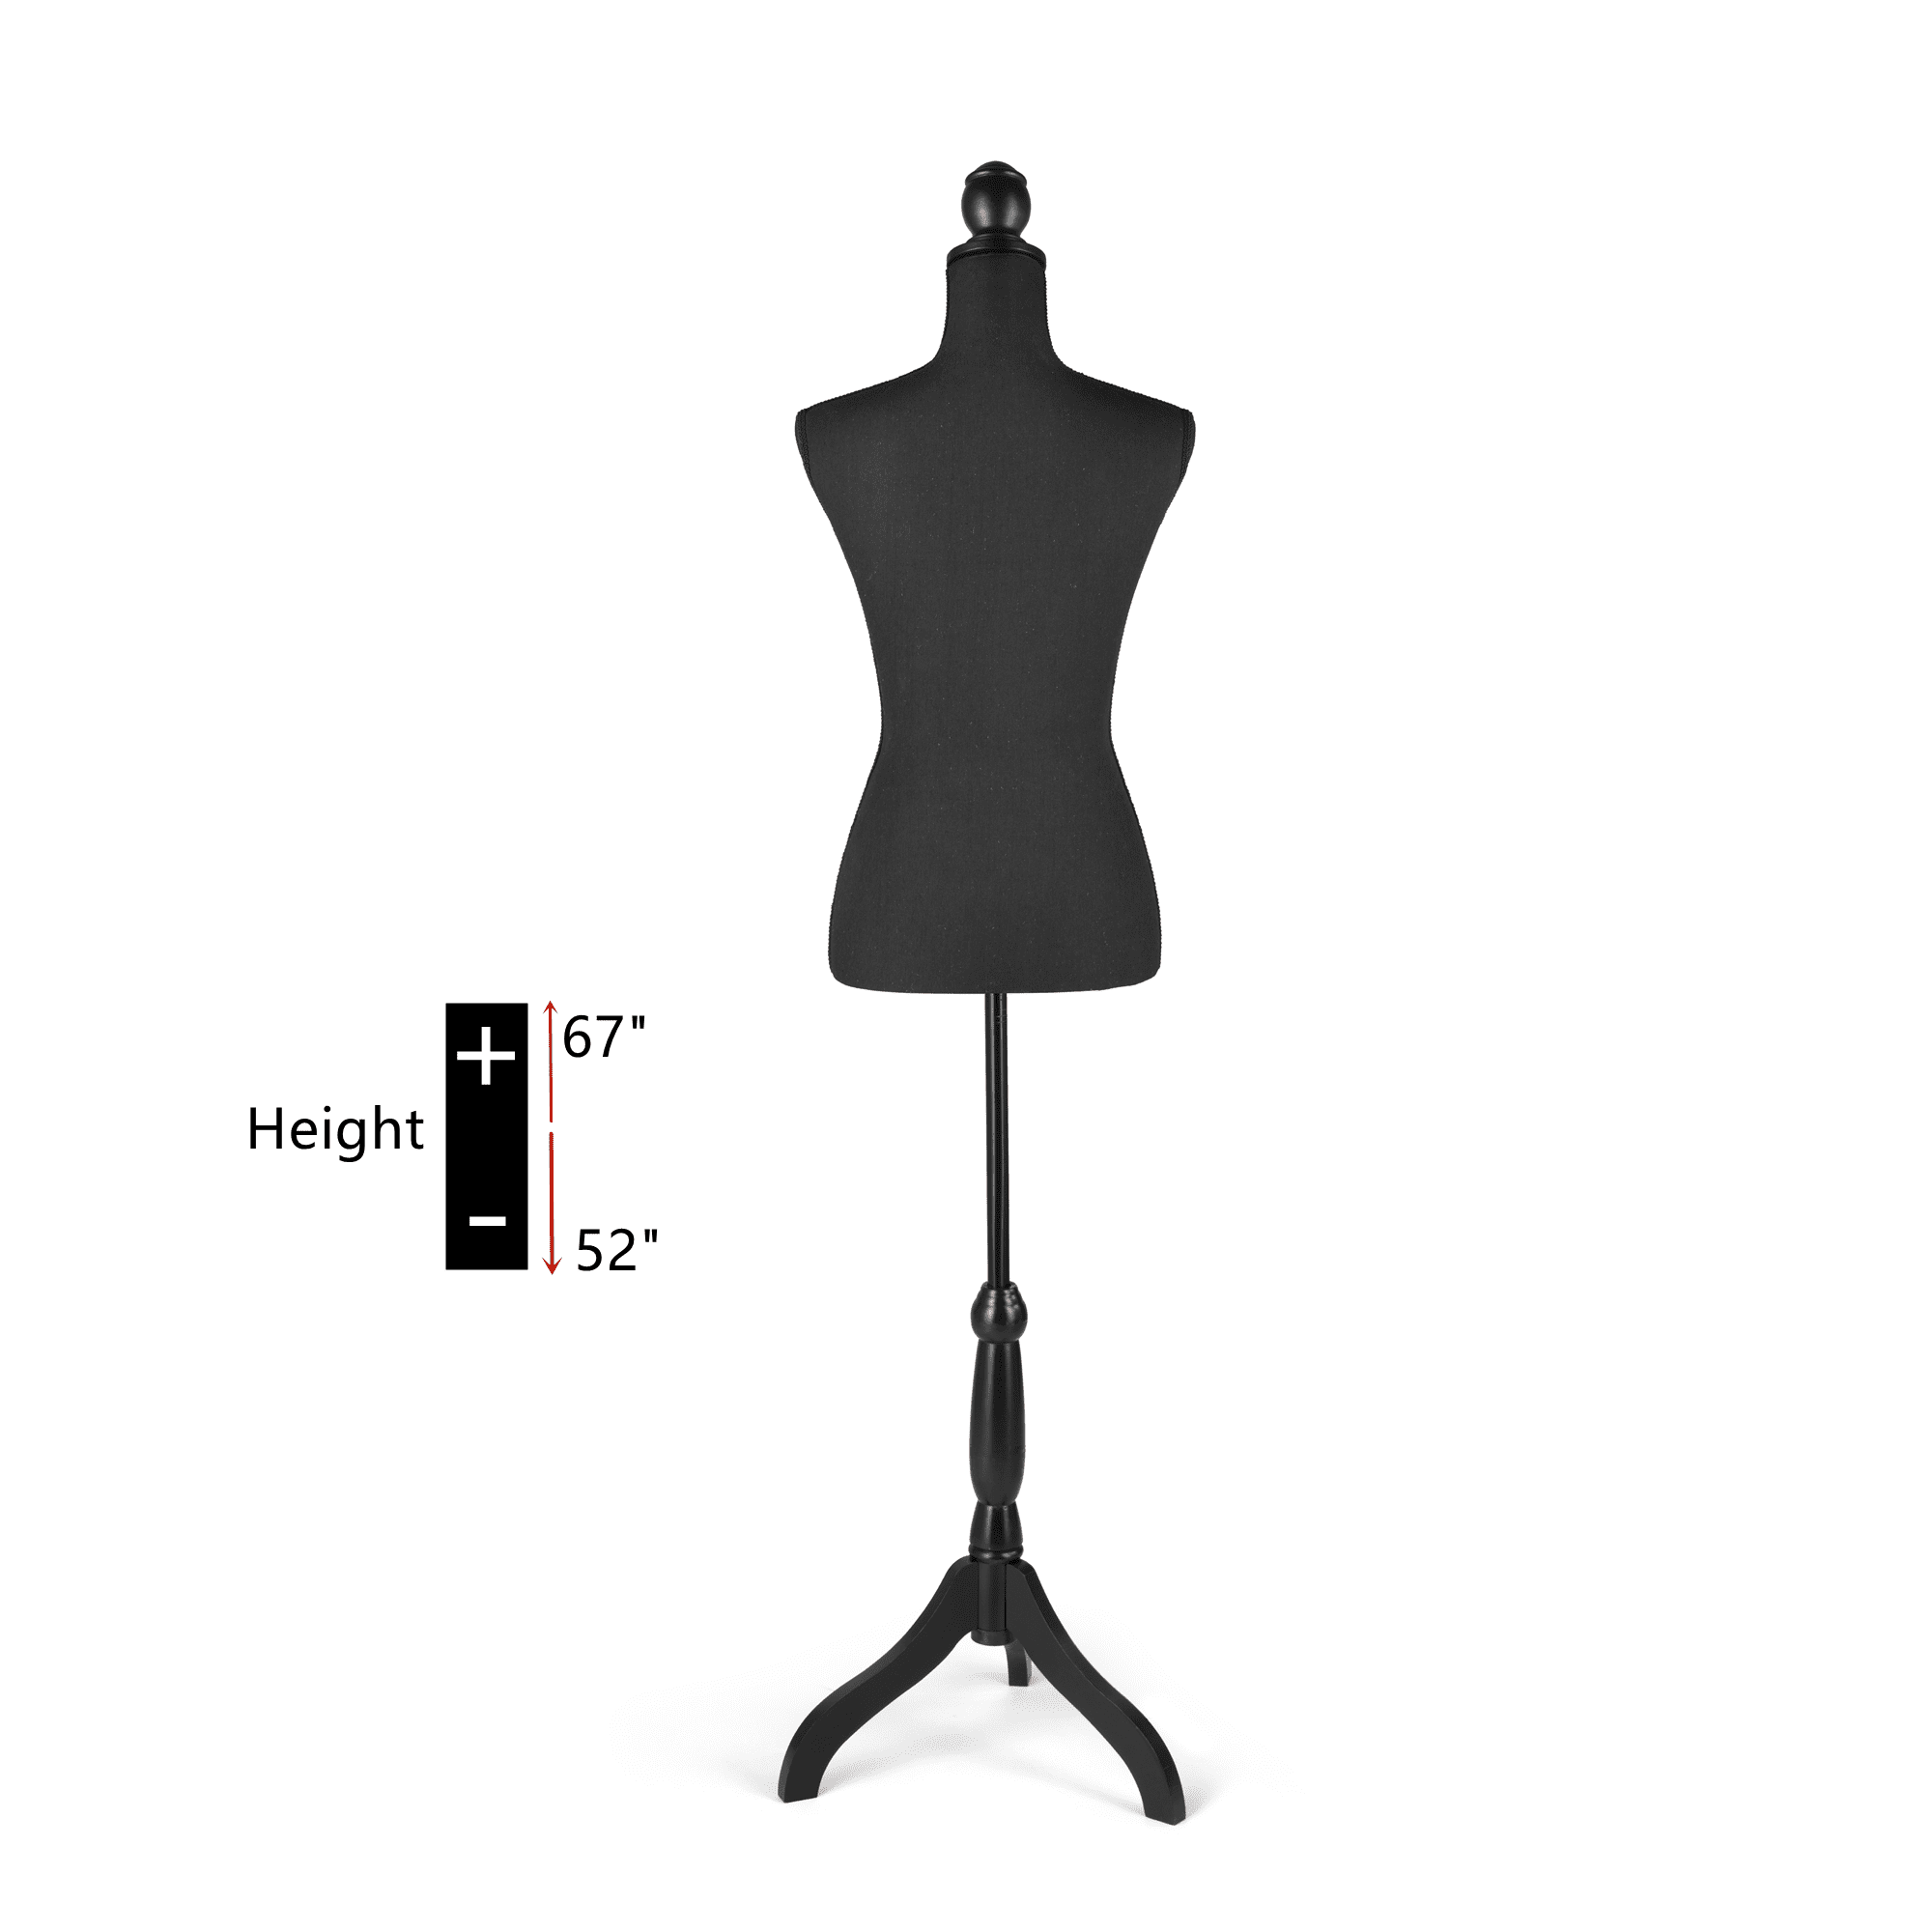  HOMBOUR Female Mannequin Body, Sewing Mannequin Torso, 52-67  Inch Height Adjustable Dress Form with Tripod Stand for Display Dressmaker  Jewelry, Black : Arts, Crafts & Sewing